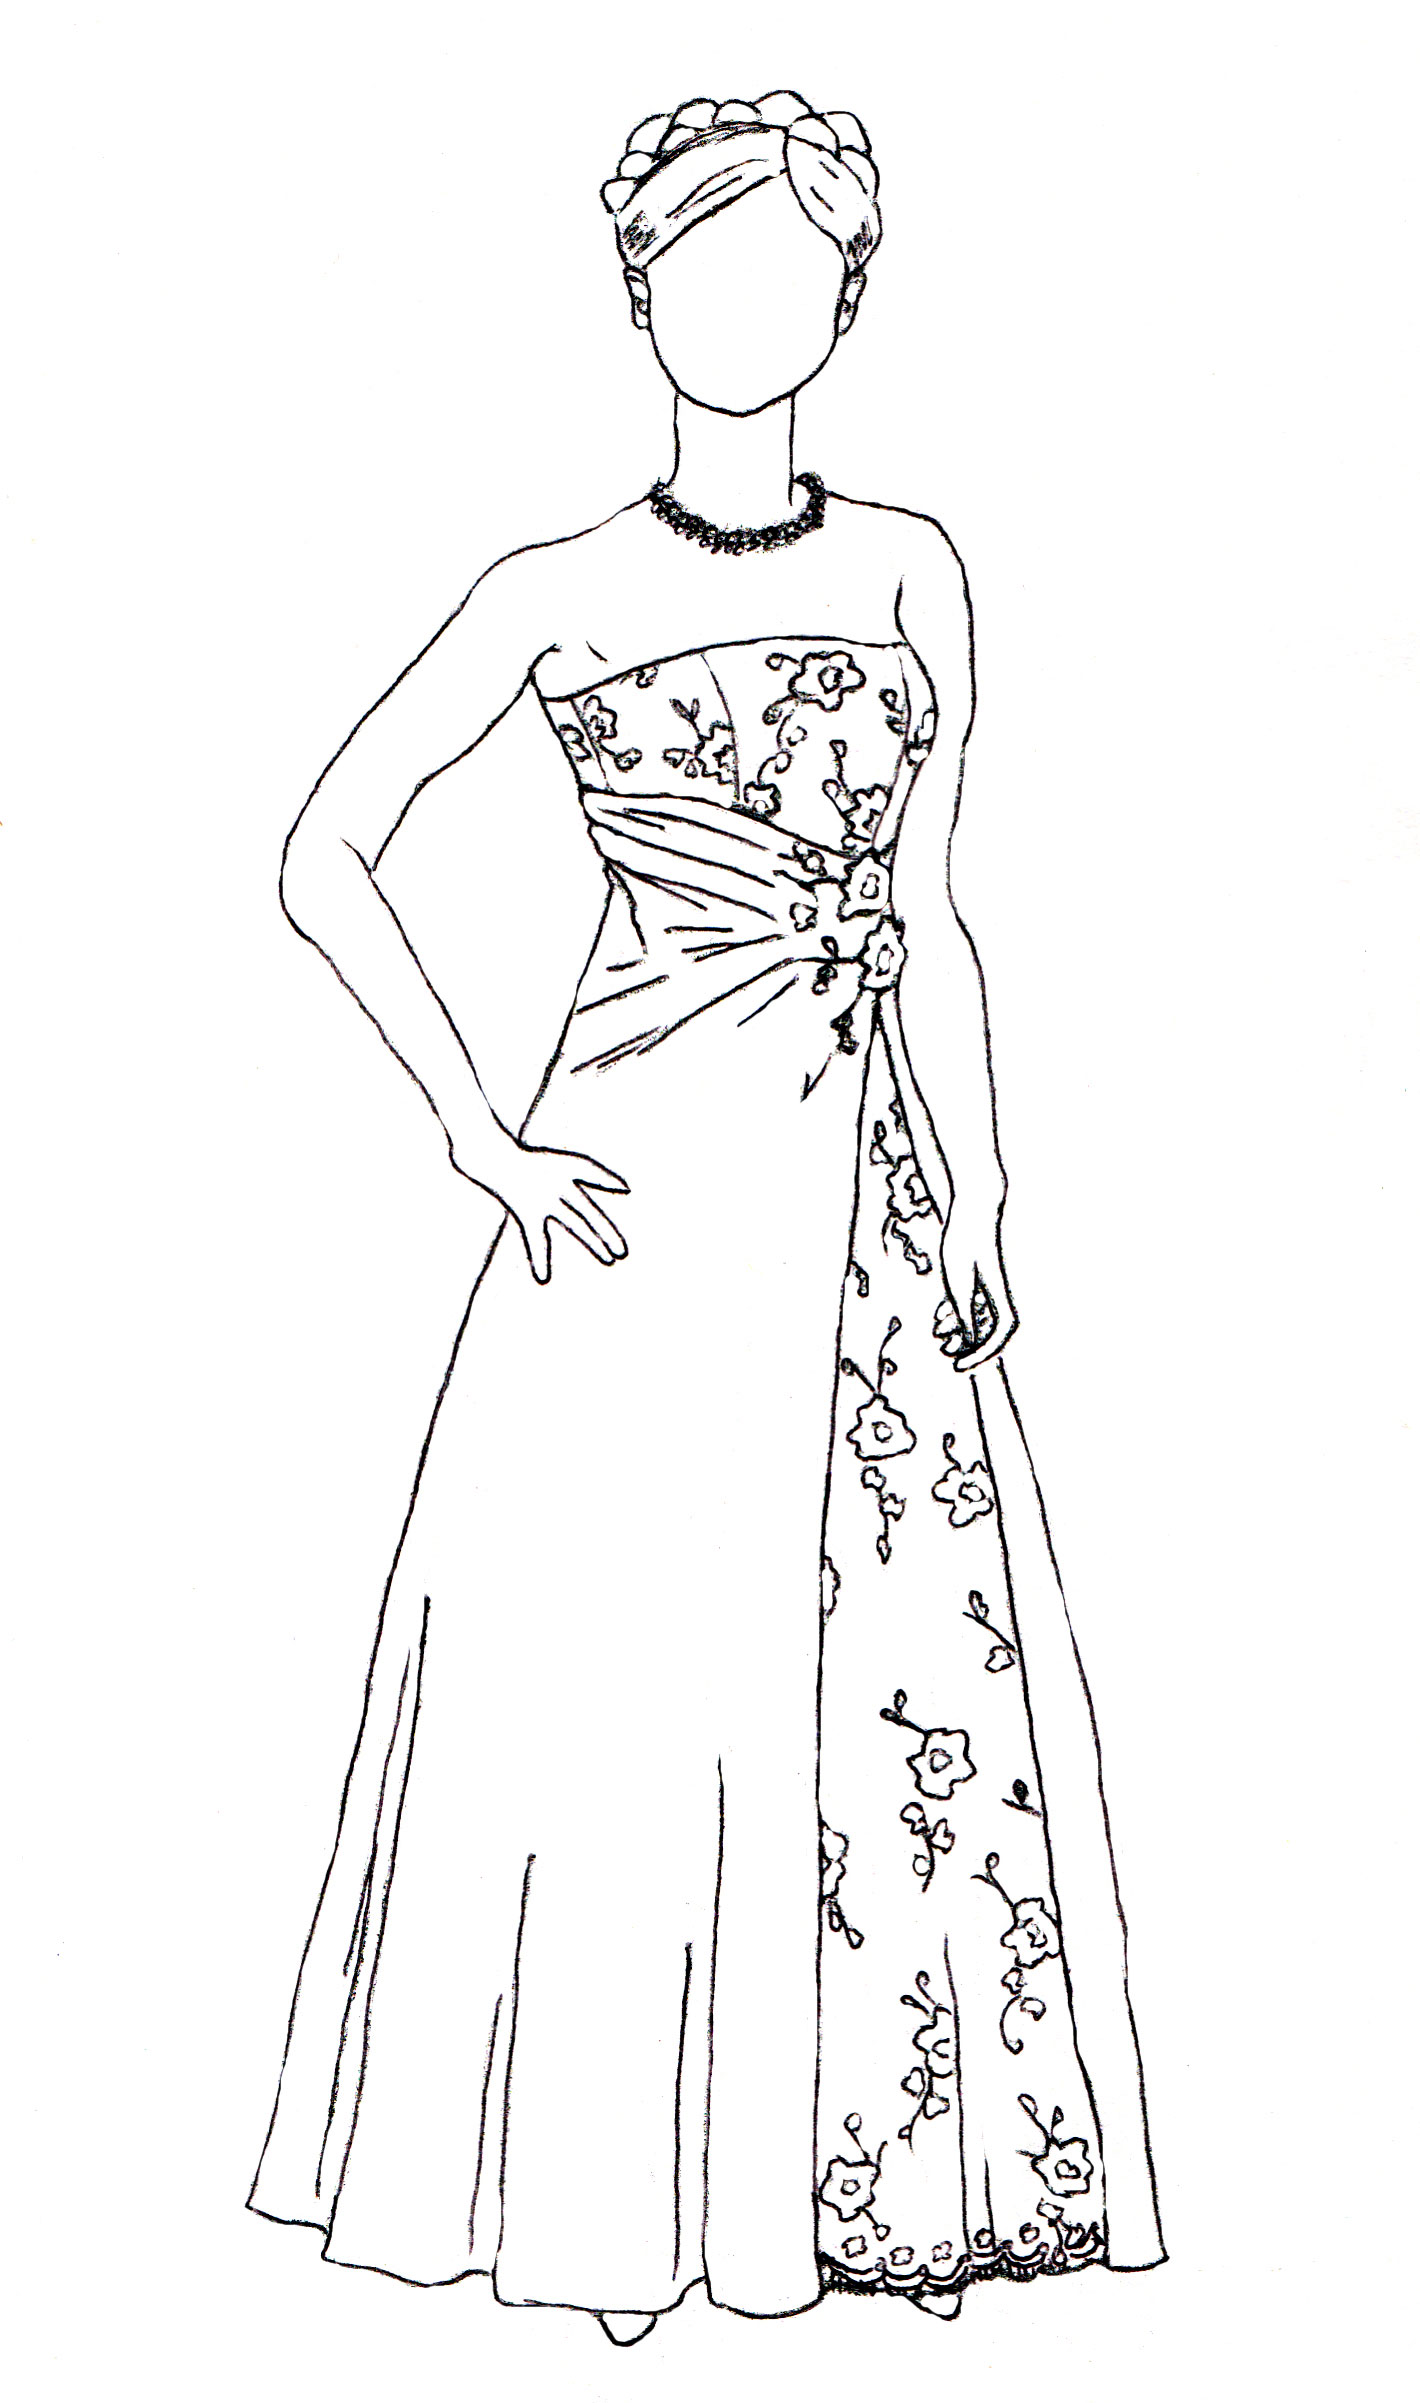 Pretty Ball Gown Dress Coloring Pages Pdf - Printable Ball Gown Dress Coloring Pages